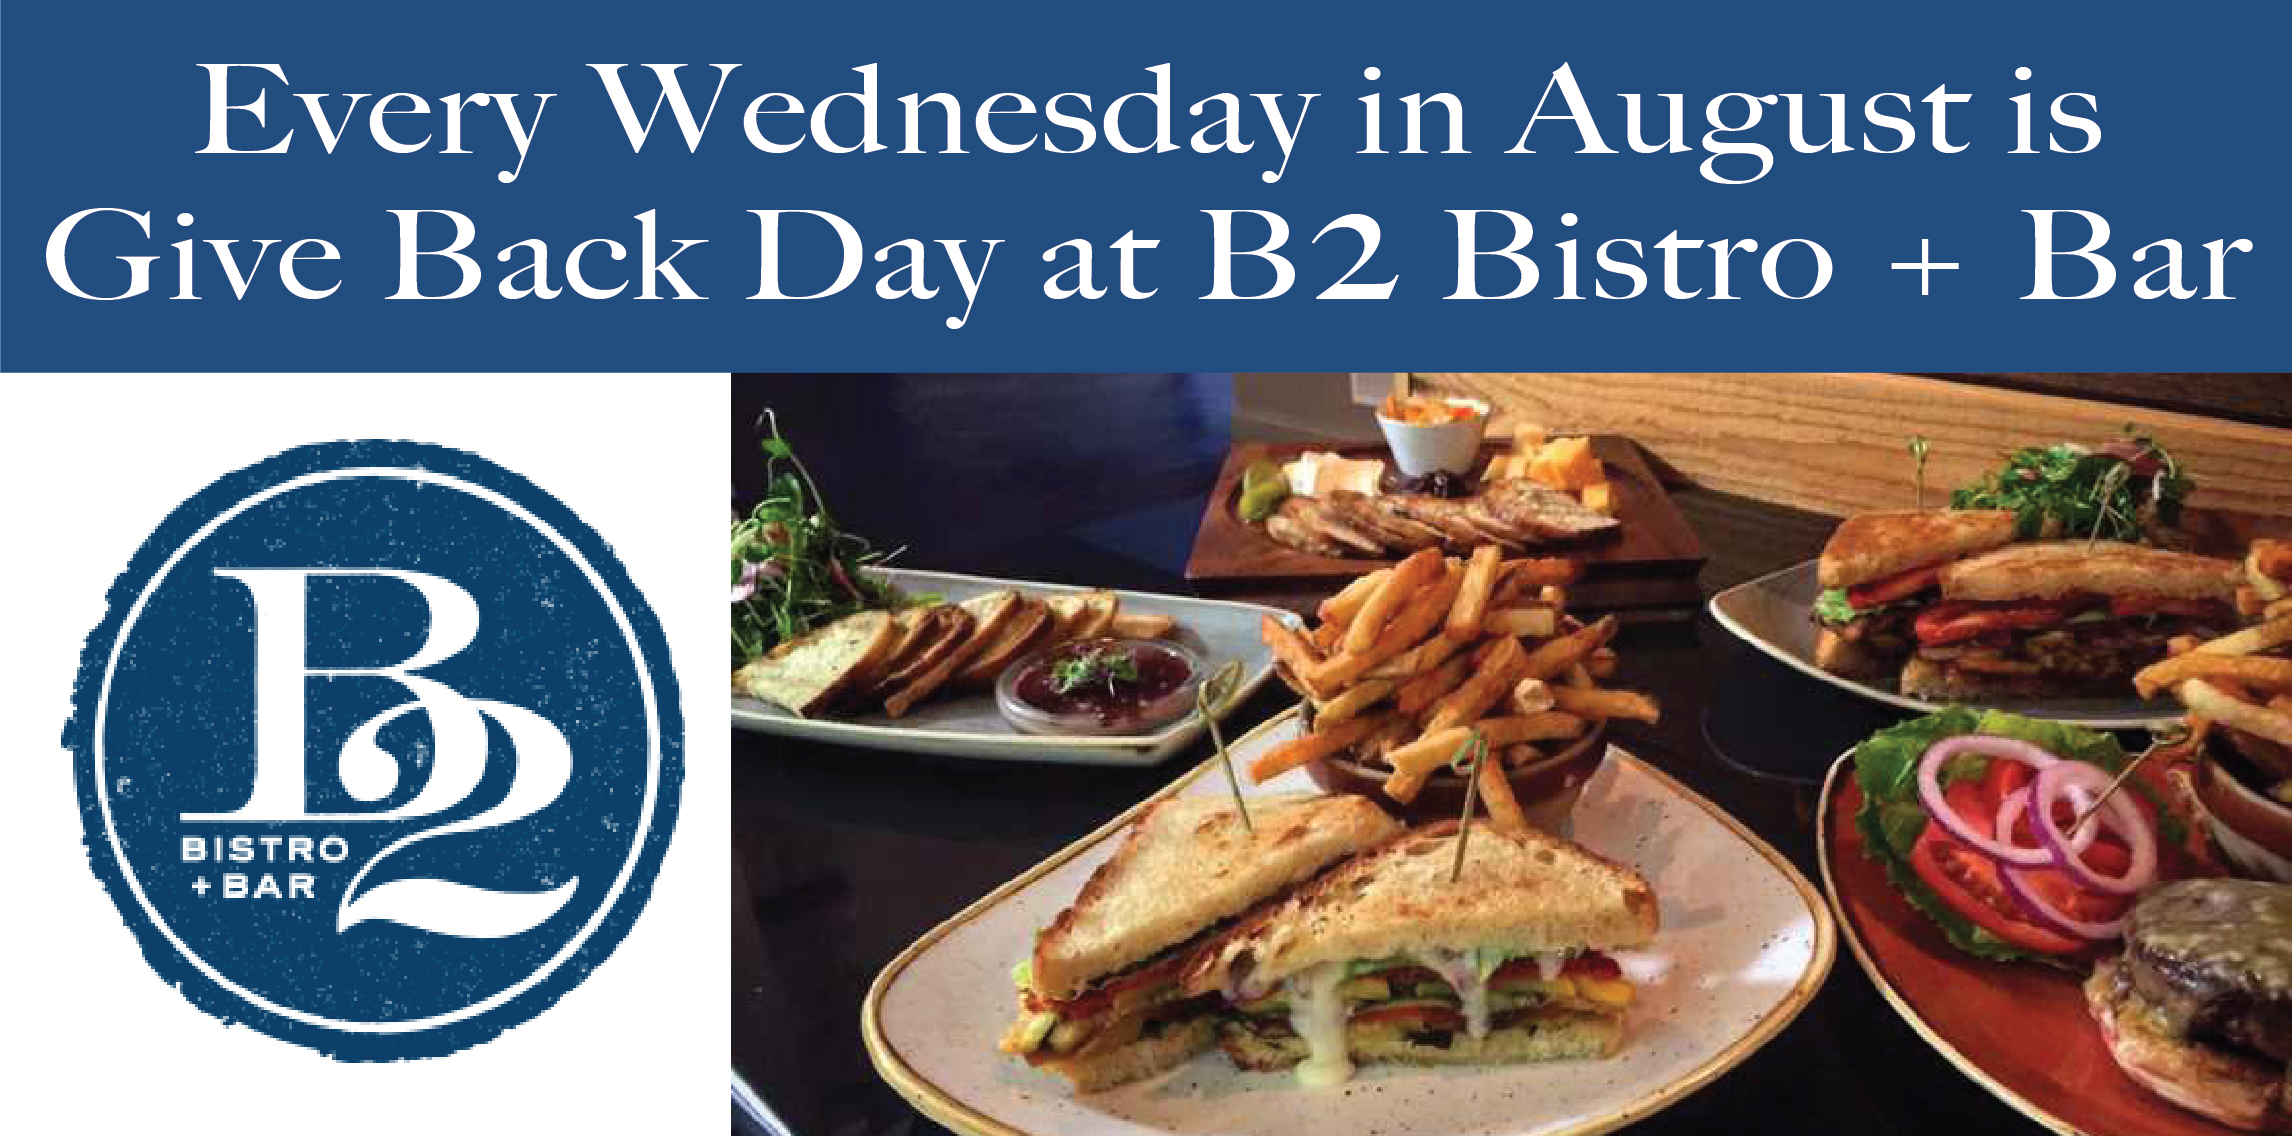 Every Wednesday is Give Back Day at B2 Bistro+Bar